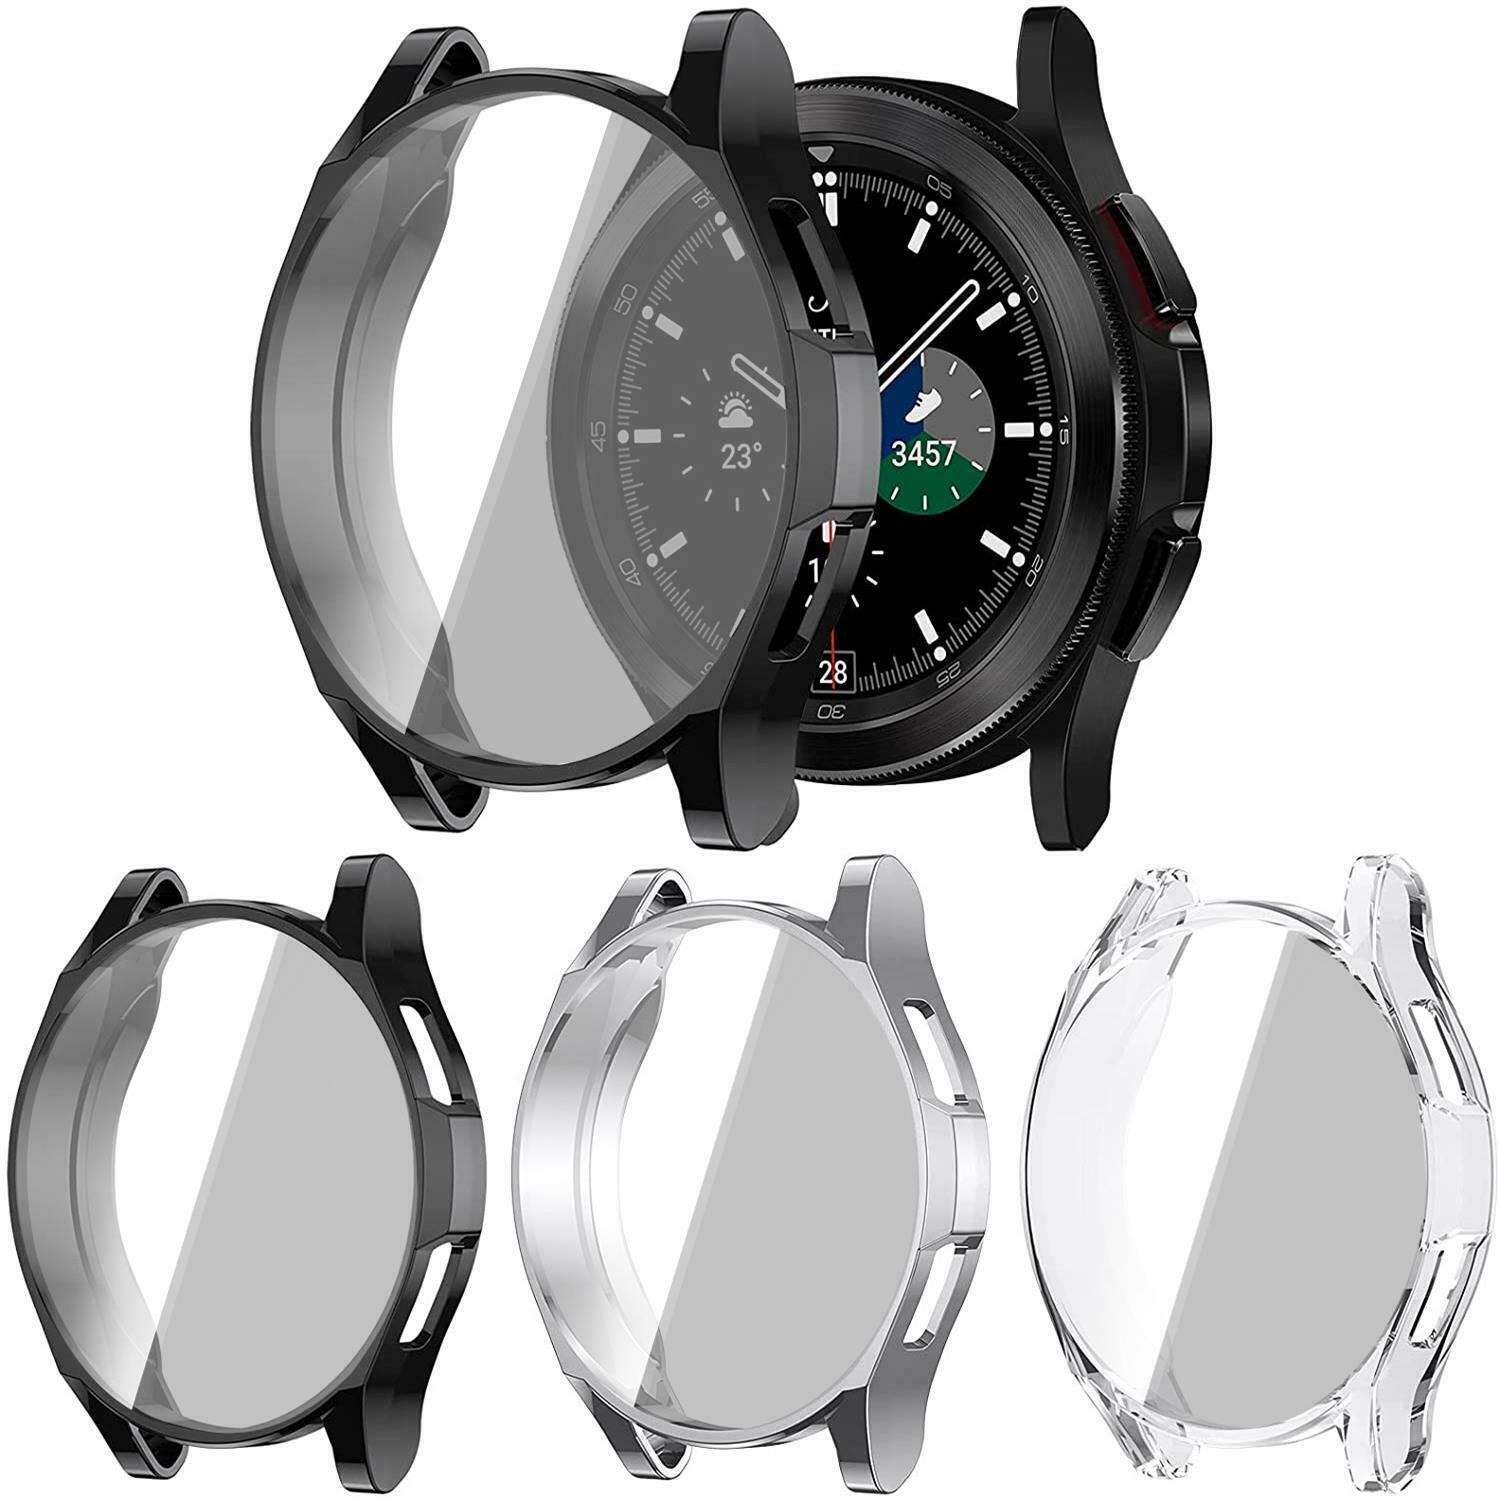 Full Cover Screen Protector Shell Case Cover Fr Samsung Galaxy Watch 4 40mm 44mm